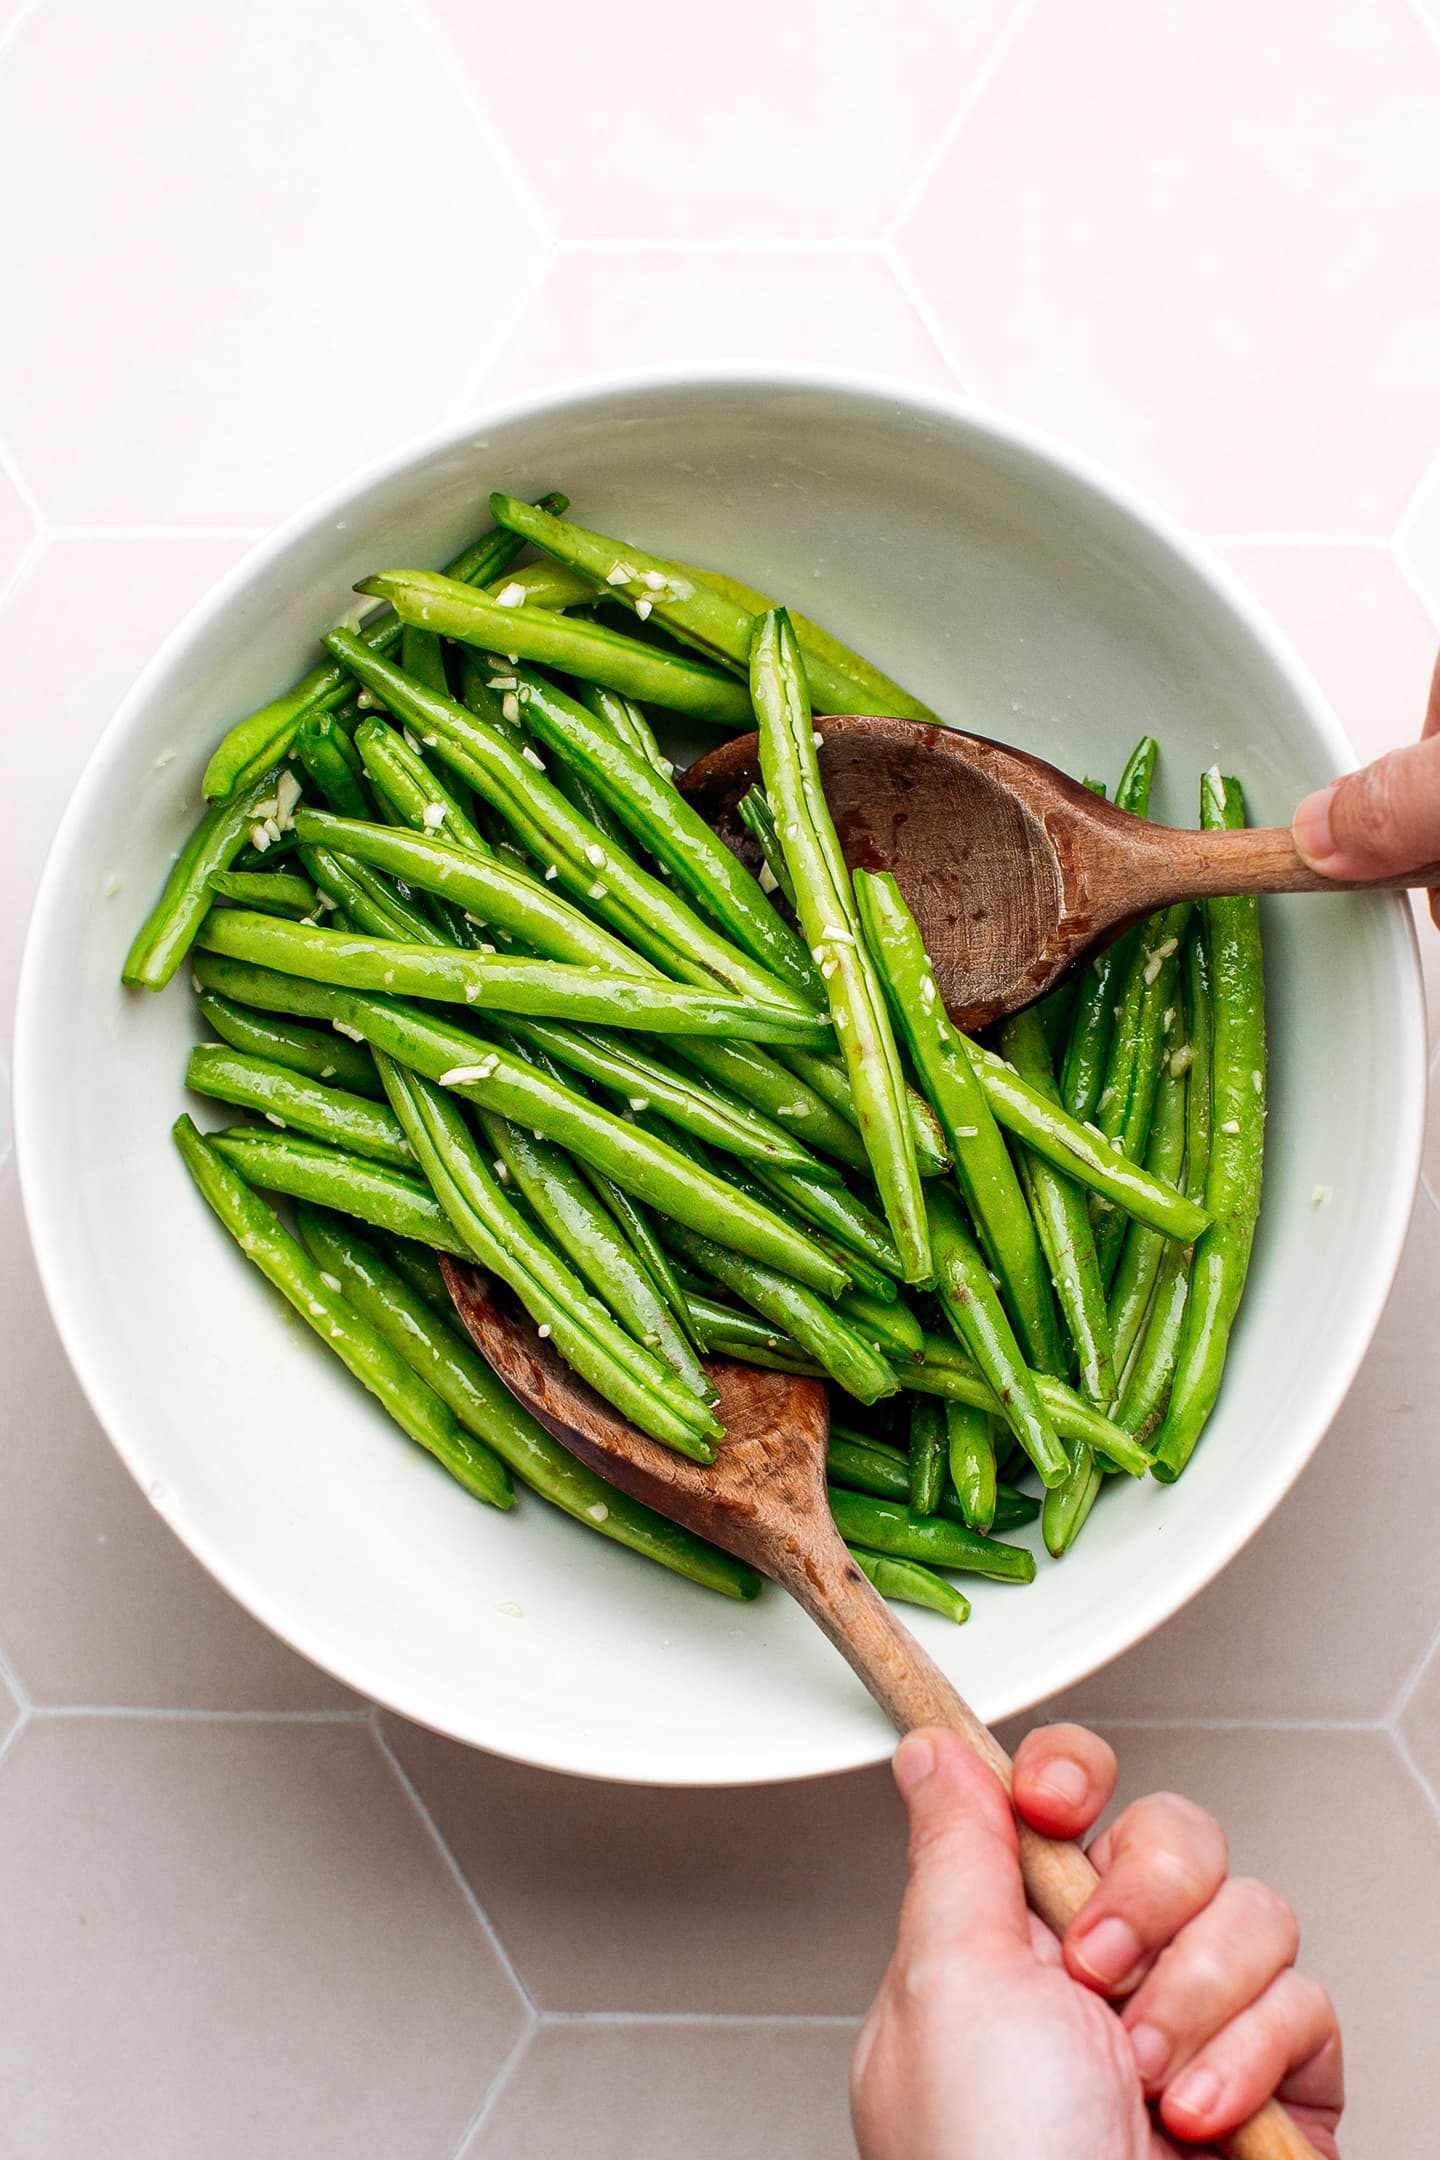 Tossing green beans with garlic, salt, and pepper.